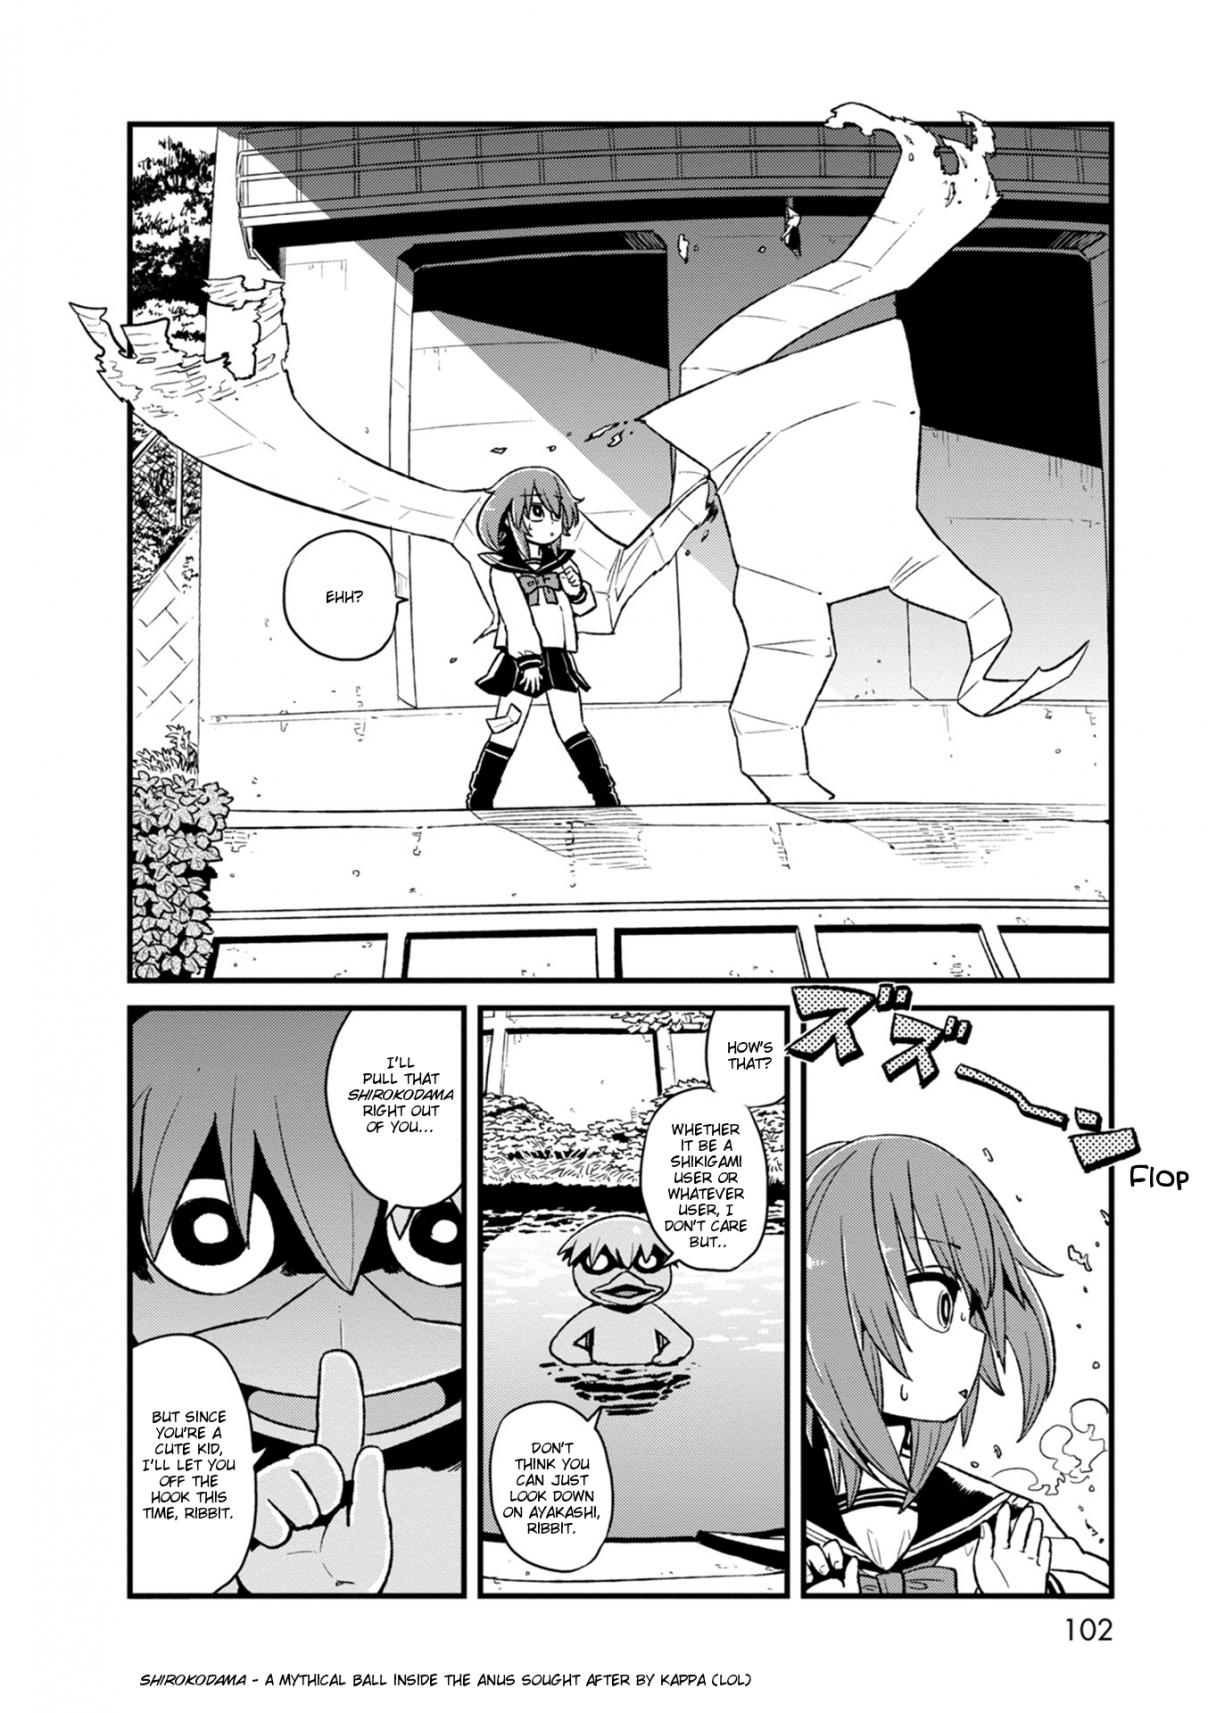 Neko Musume Michikusa Nikki Vol. 15 Ch. 90 Passing the Time Chasing After a Frog Person